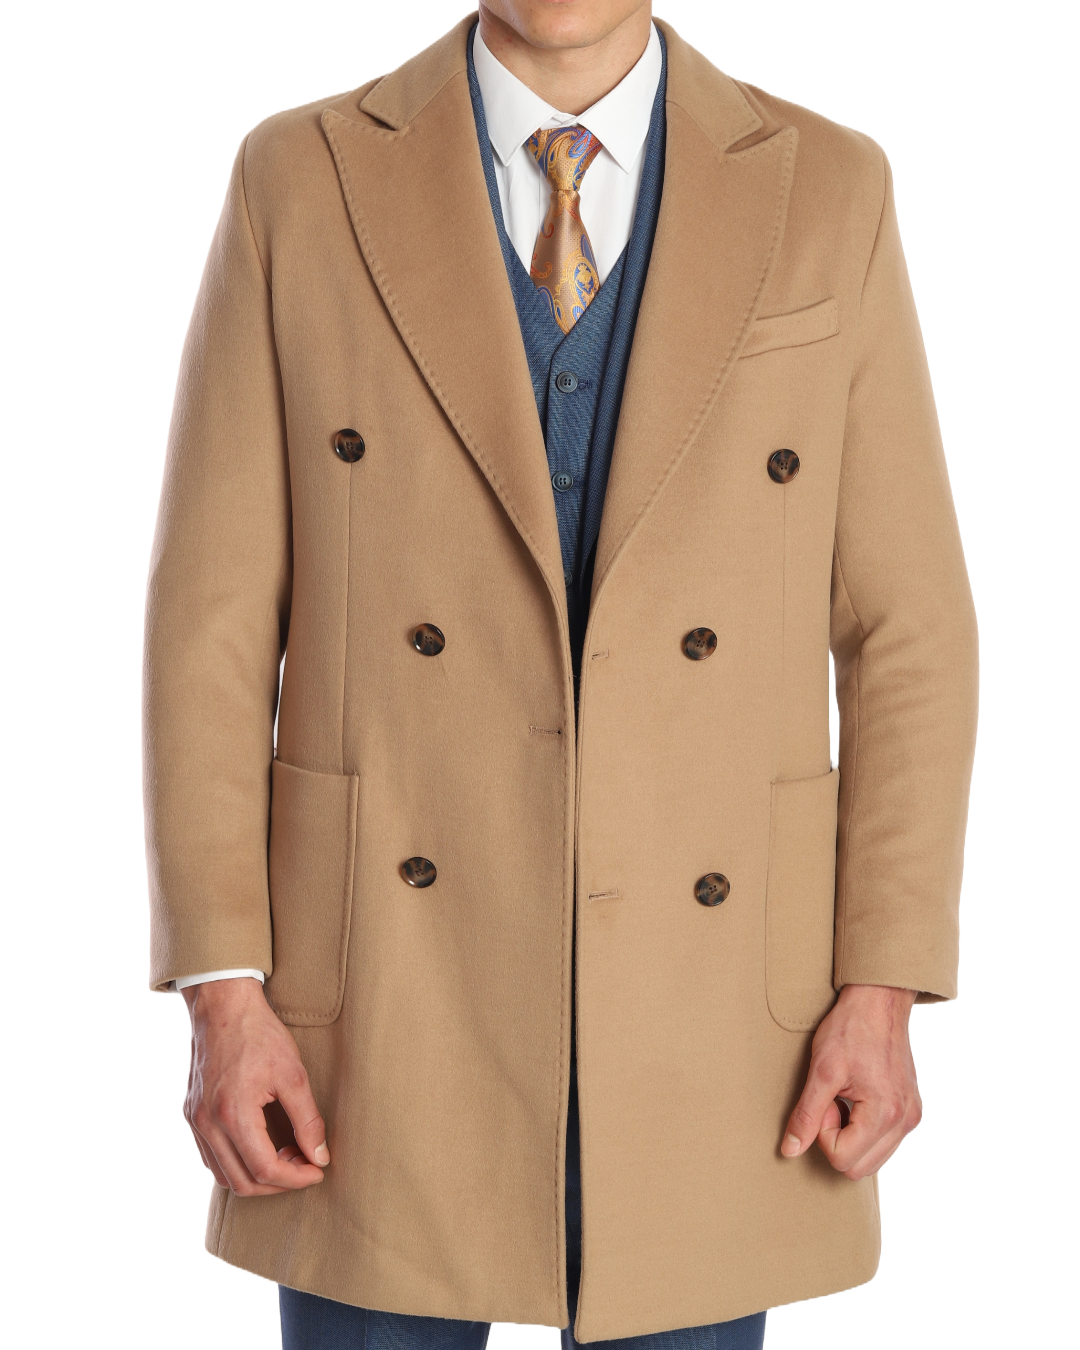 ICONY OVERCOAT - Tan Pure Wool by ECCA CHIC, London